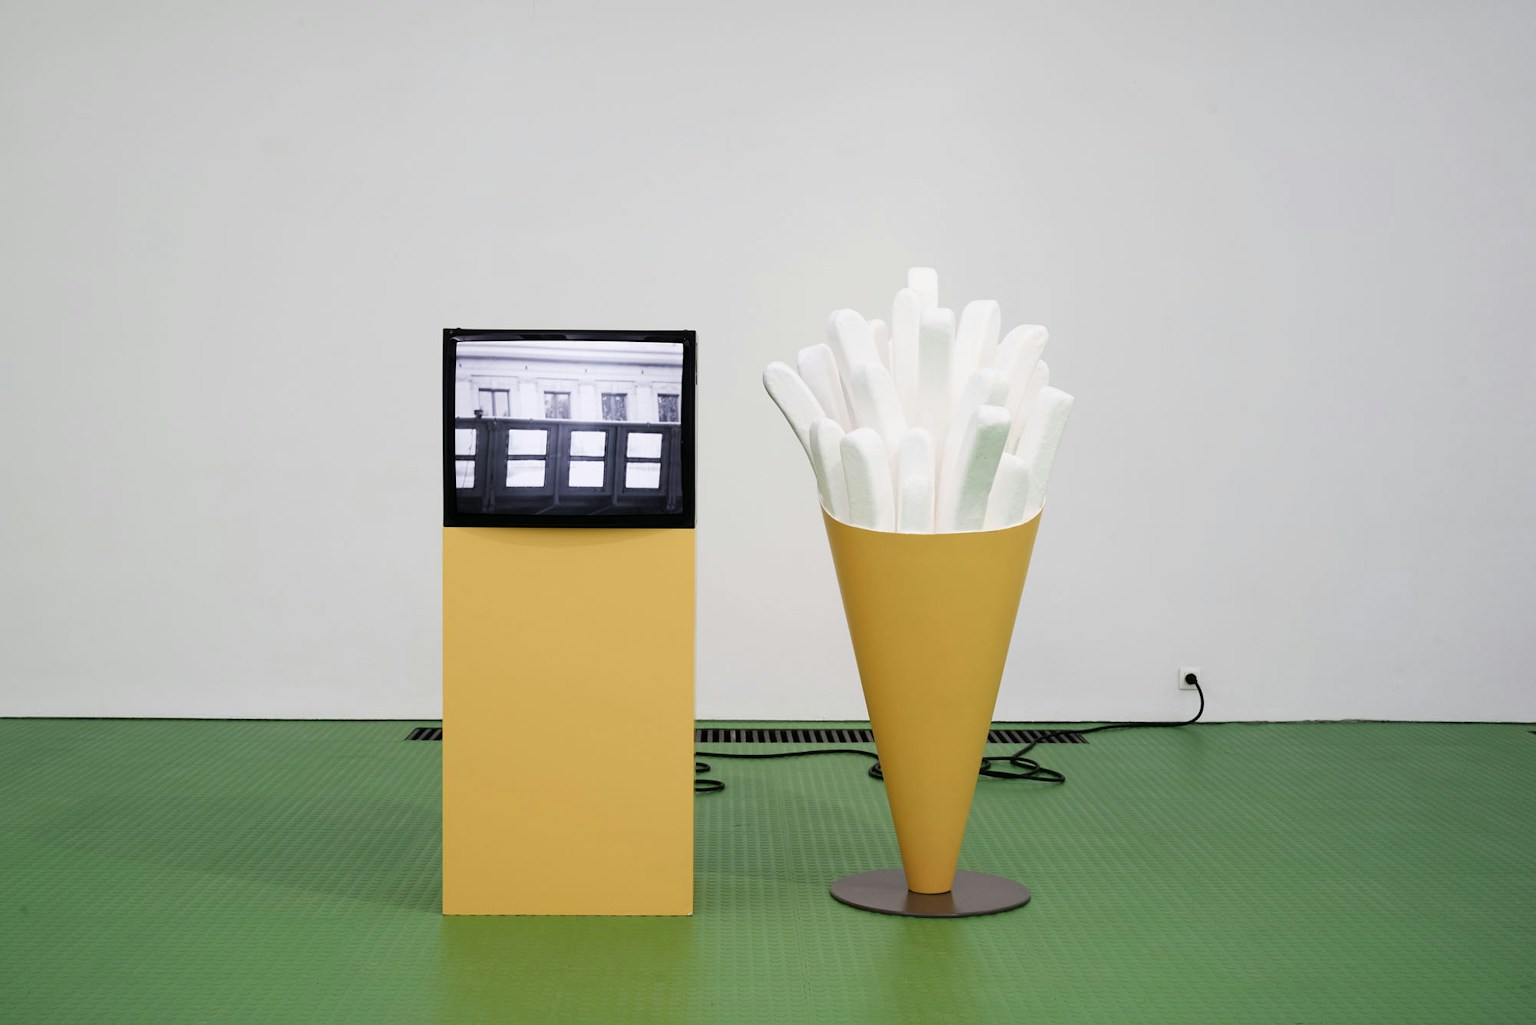 DP Hello are we in the show Installation S M A K 2021 image Dirk Pauwels 35